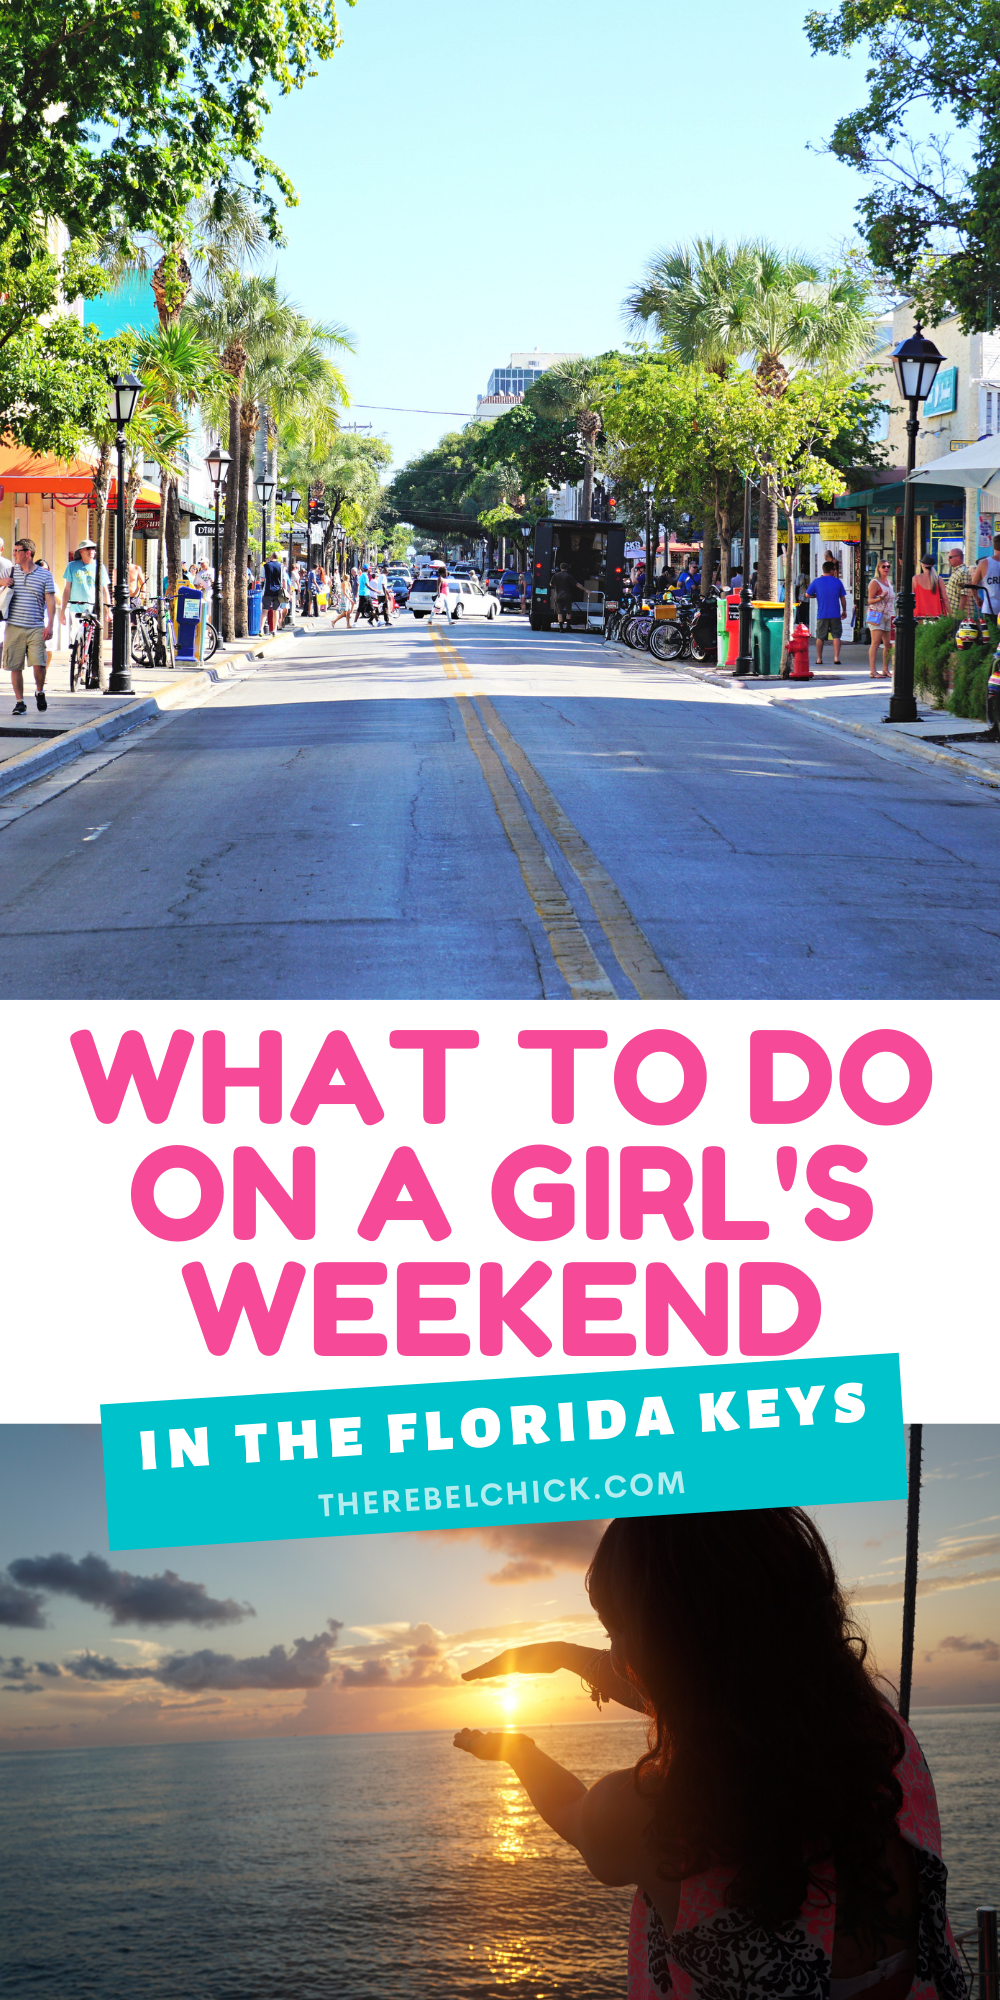 How to Spend a Girls Weekend in the Florida Keys